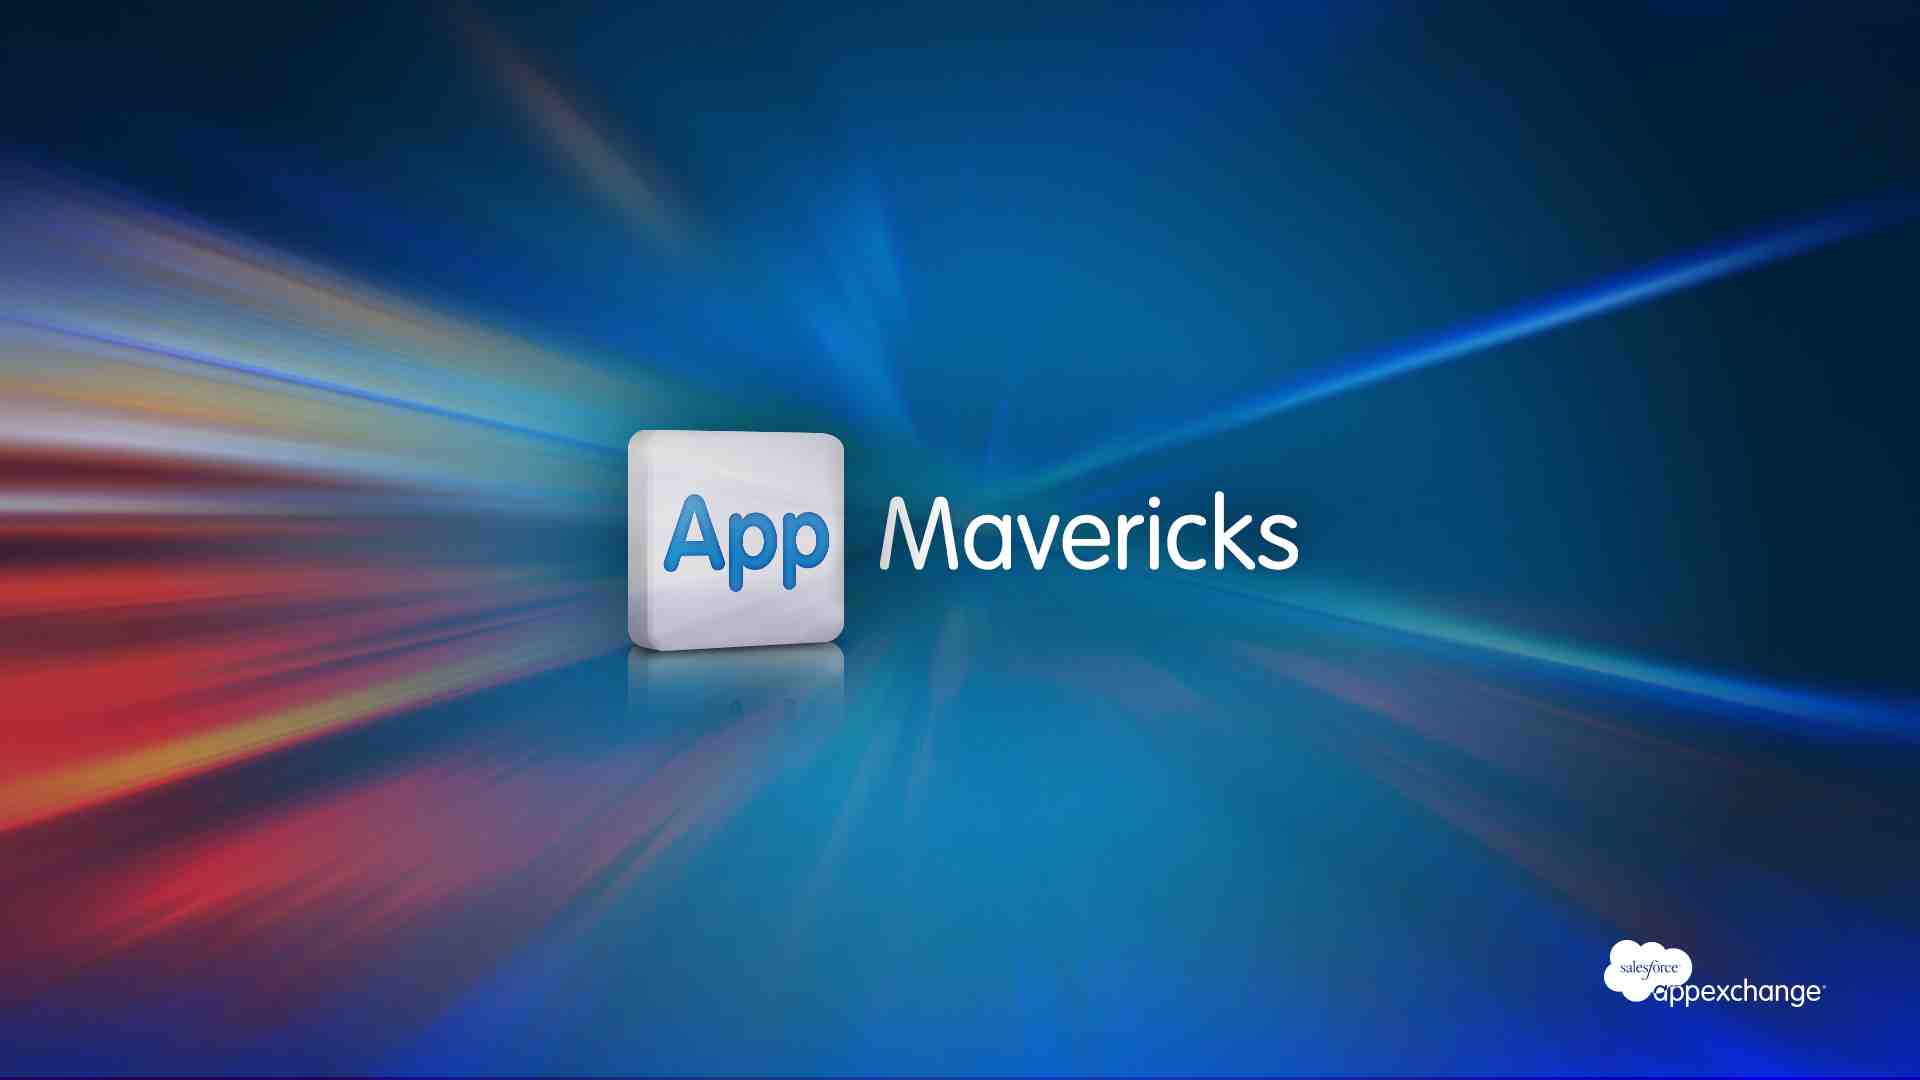 Why the Most Security-Conscious Organizations Choose e-SignLive: App Mavericks